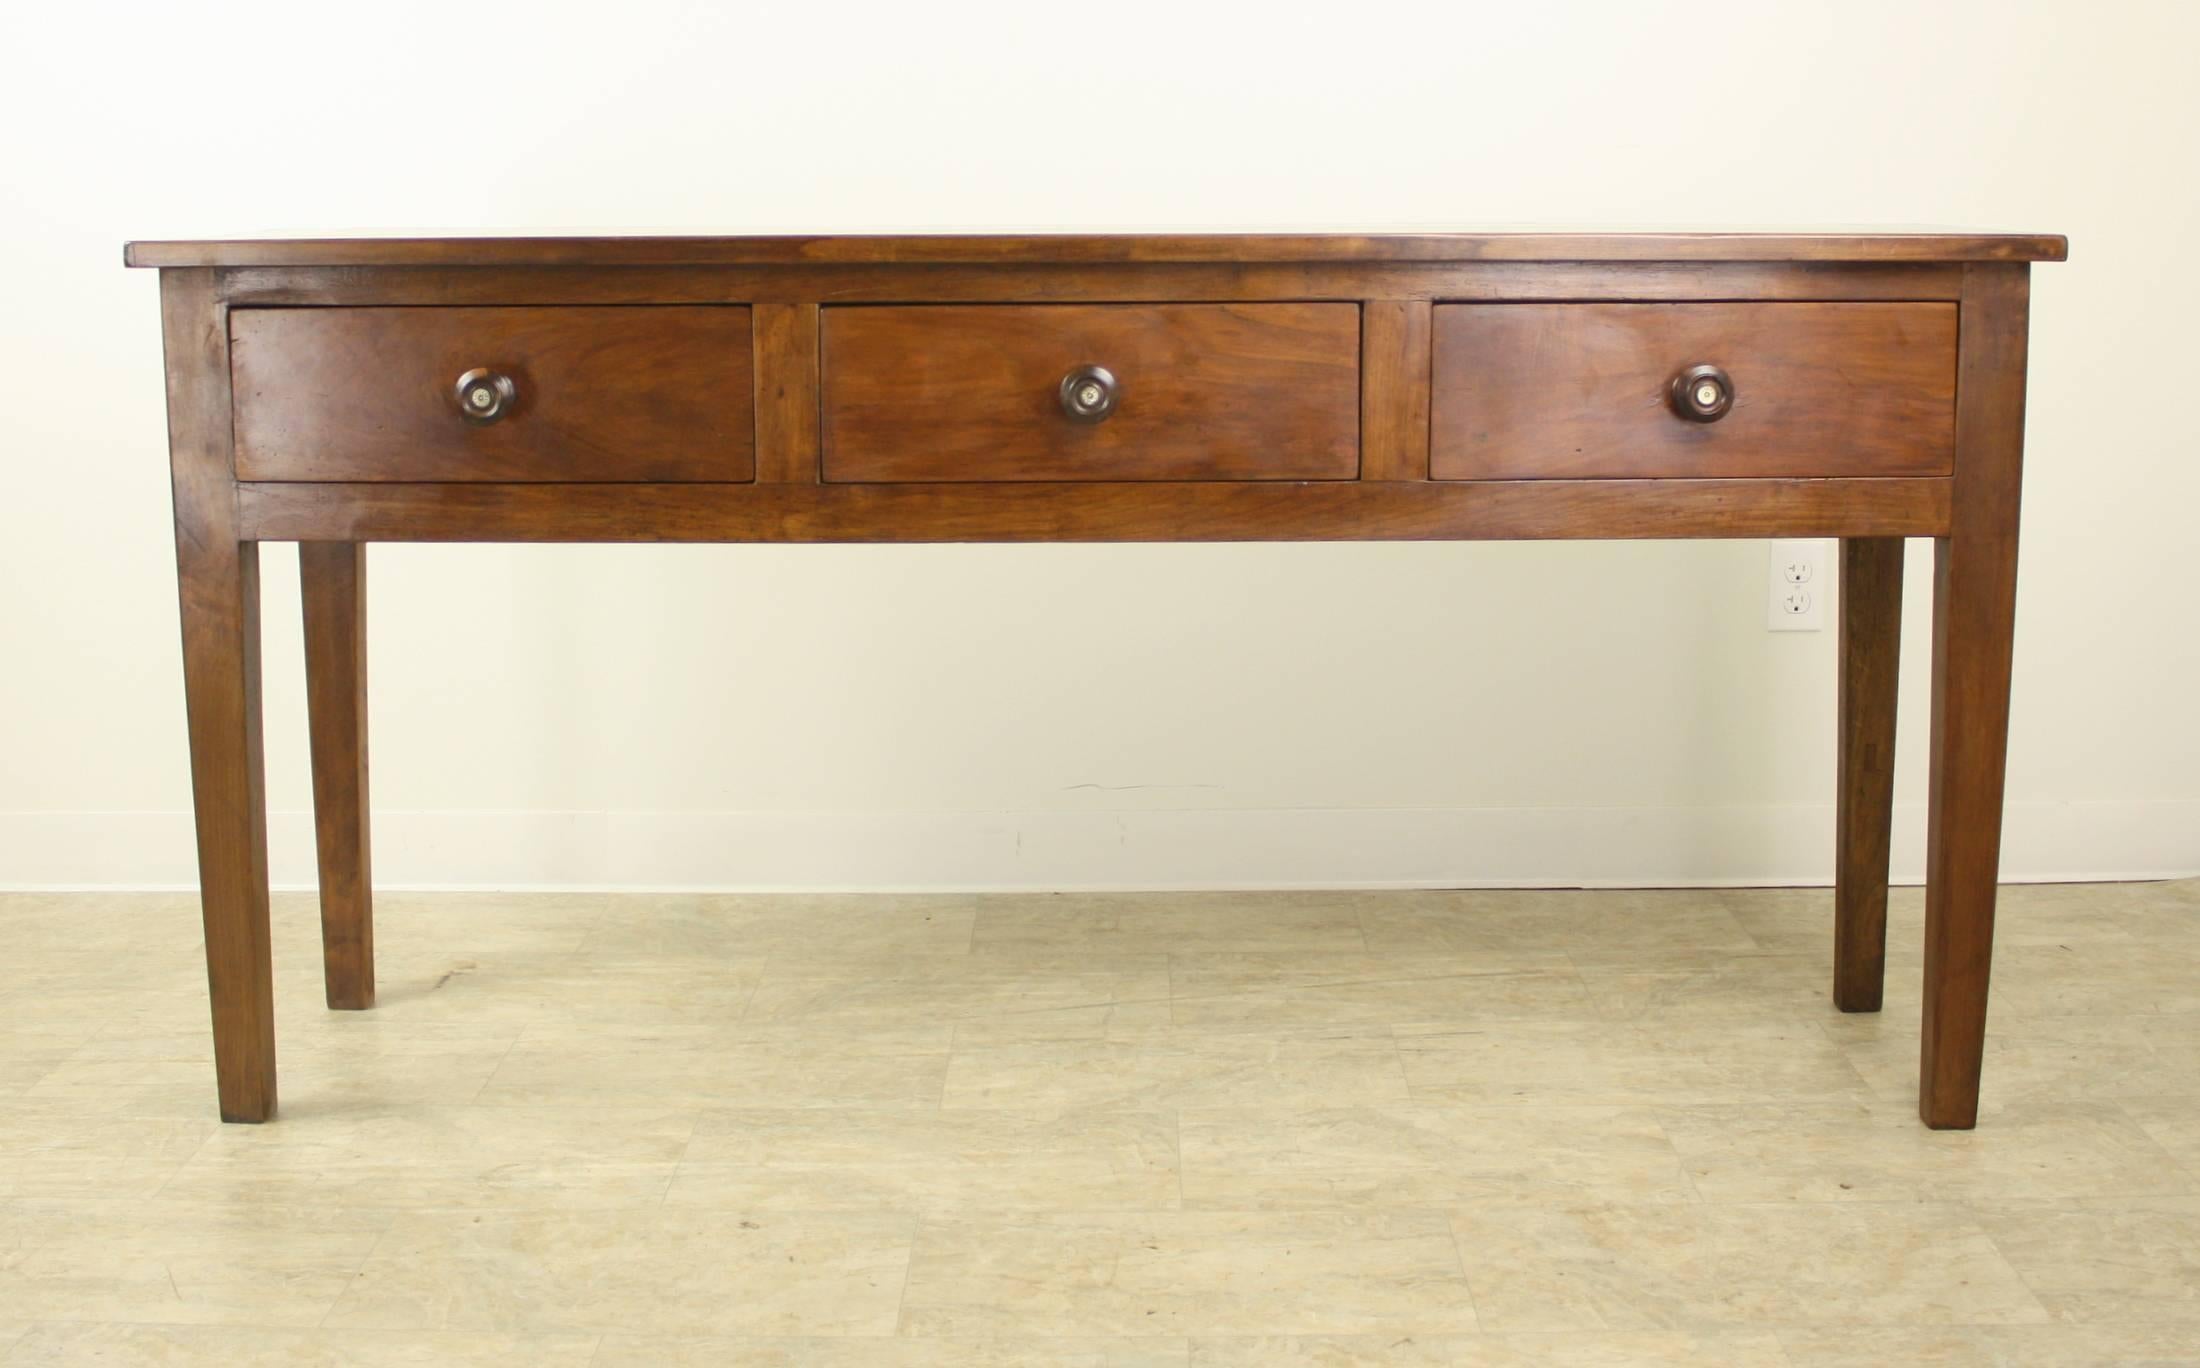 This handsome piece boasts the classic three-drawer style on sturdy, slightly tapered legs, nicely pegged. At 15.75